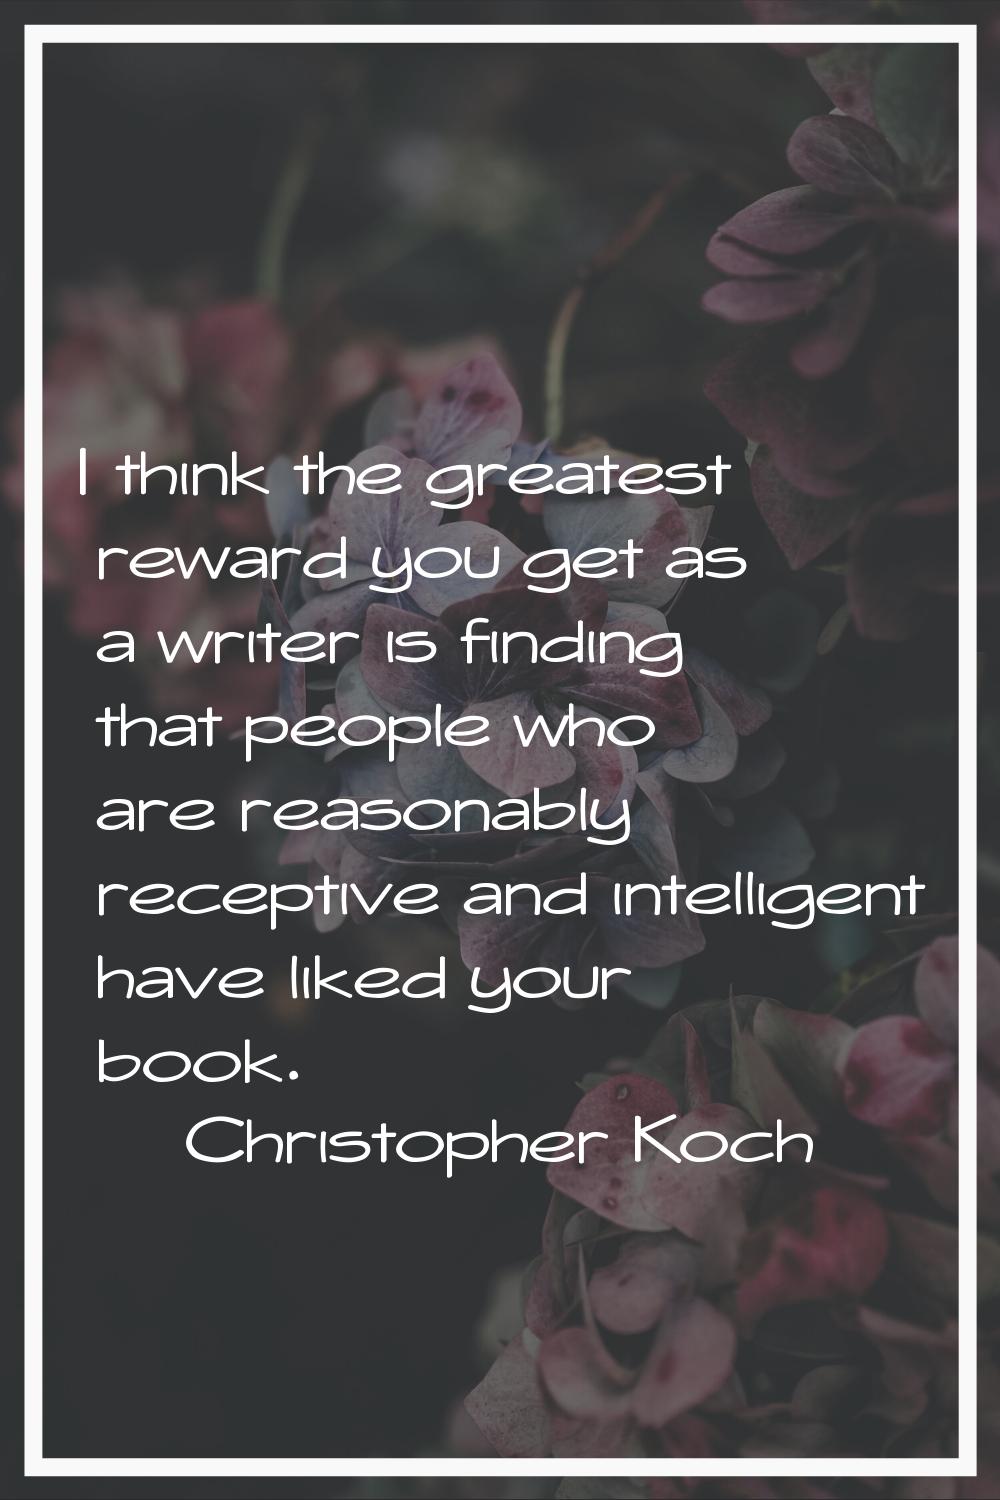 I think the greatest reward you get as a writer is finding that people who are reasonably receptive